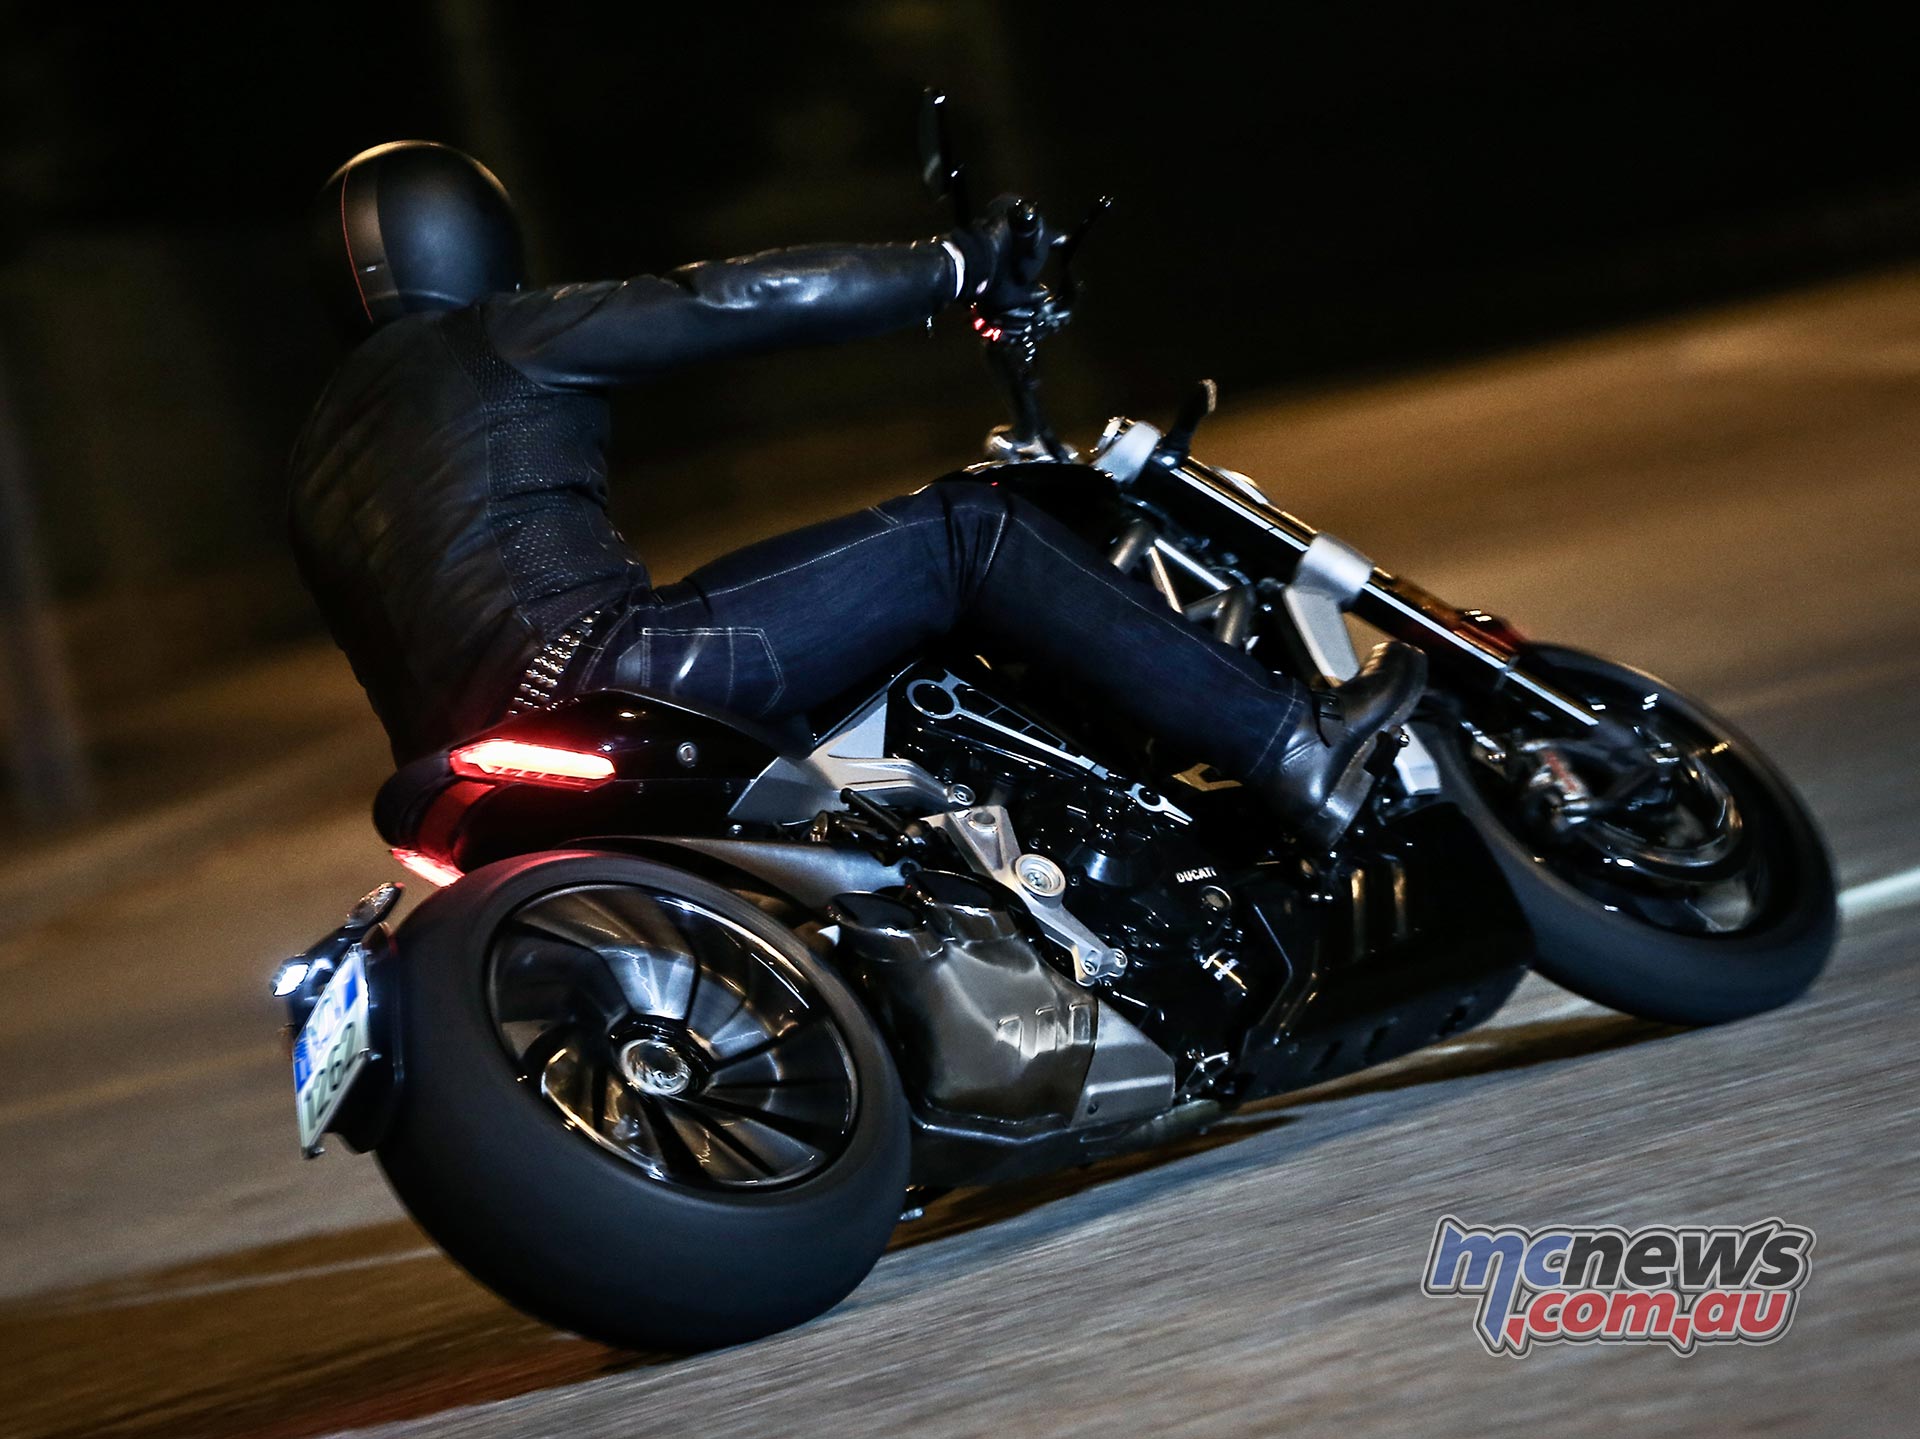 Ducati Xdiavel S Review Tan Terror On The Loose Motorcycle News Sport And Reviews